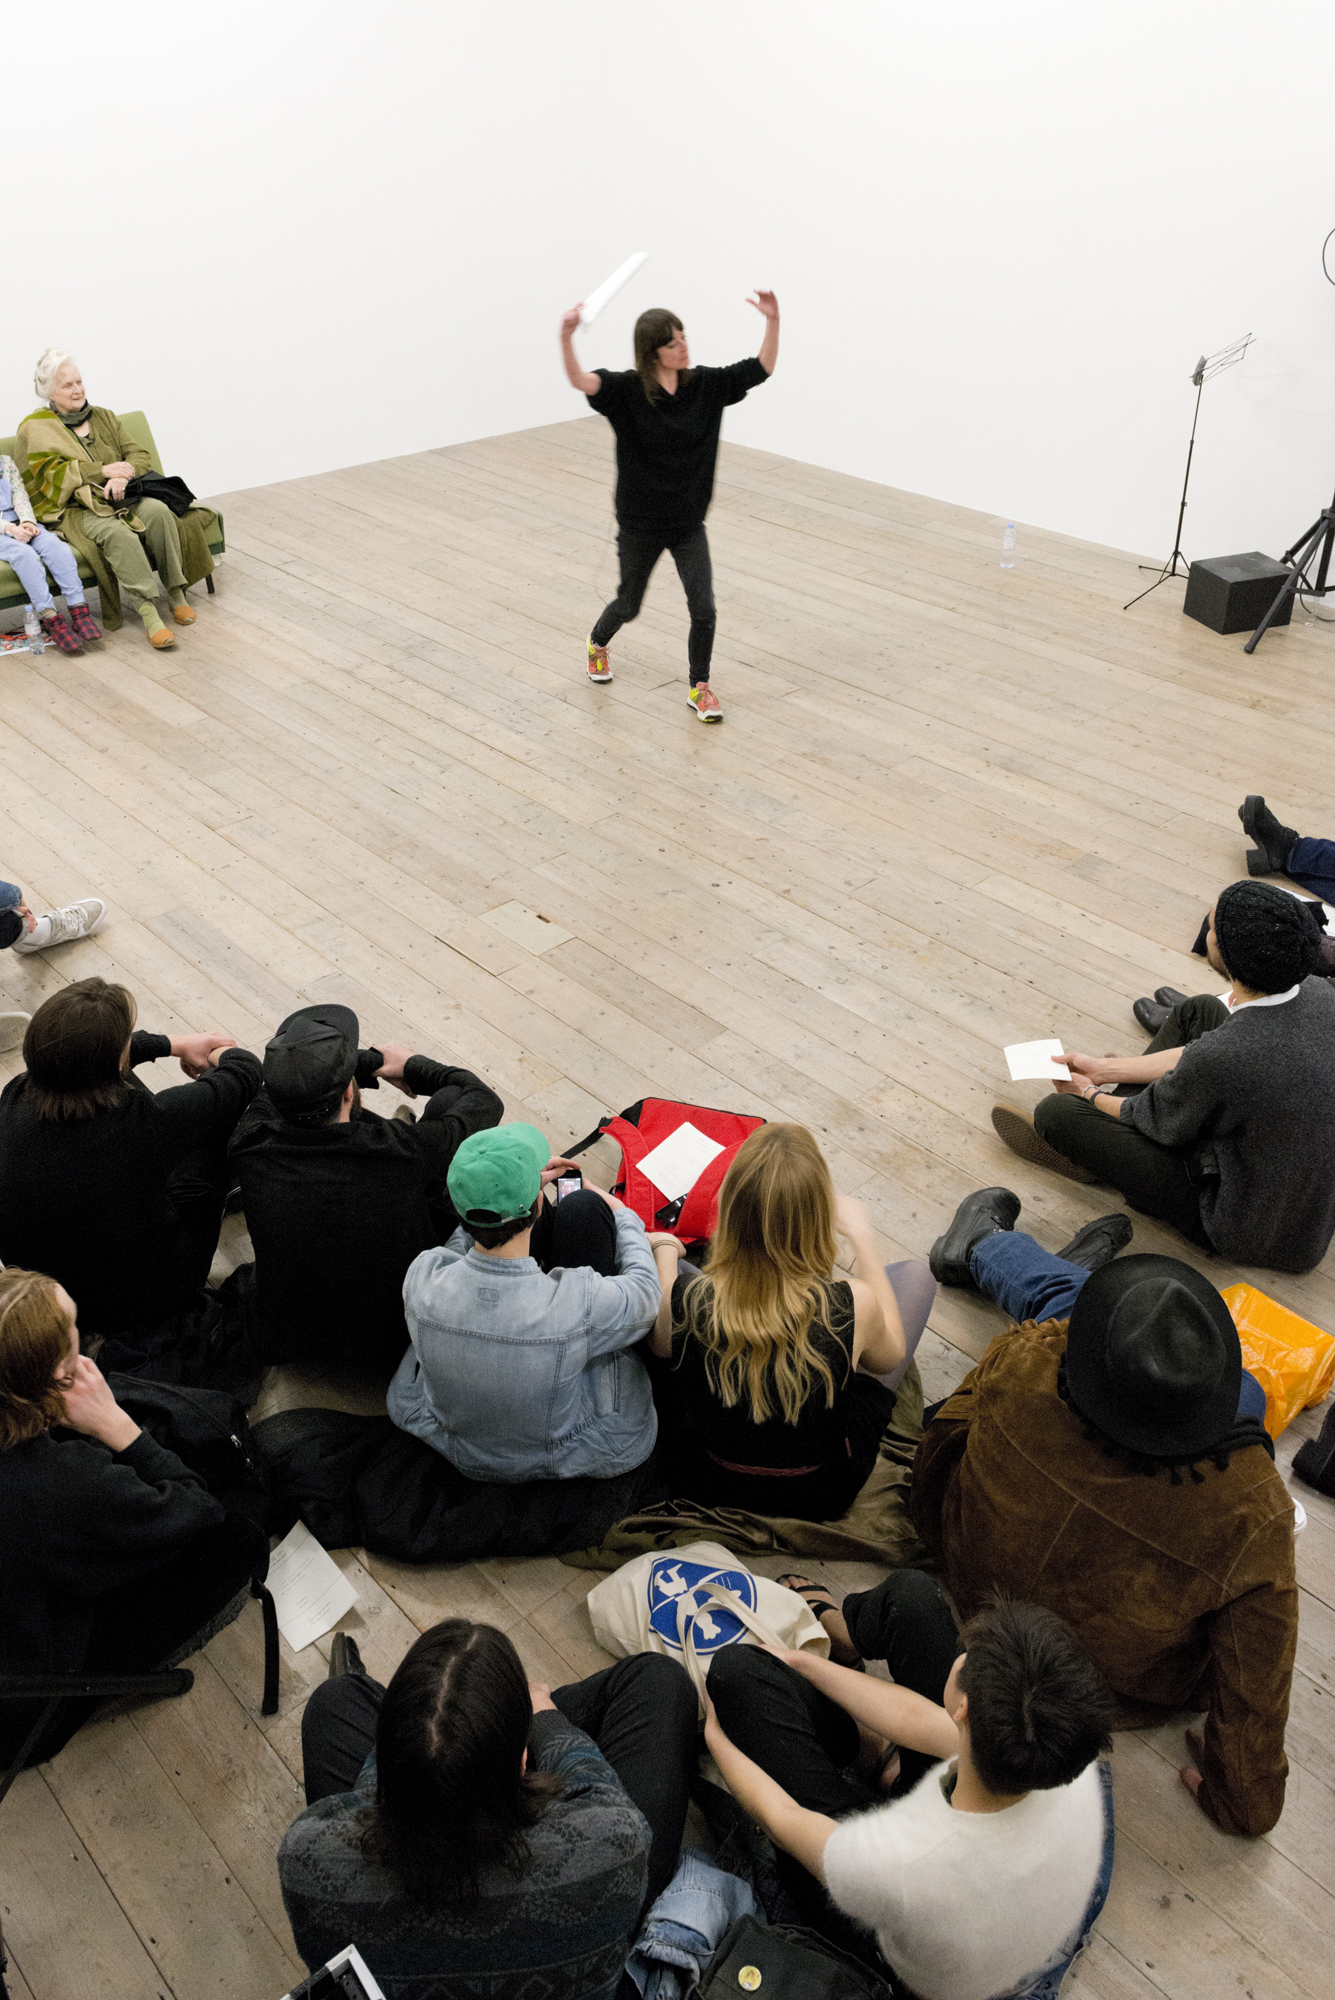 John Latham, 'Lectures', performed by Sue Tompkins (JOHN LATHAM'S LECTURES AT RAVEN ROW 8)